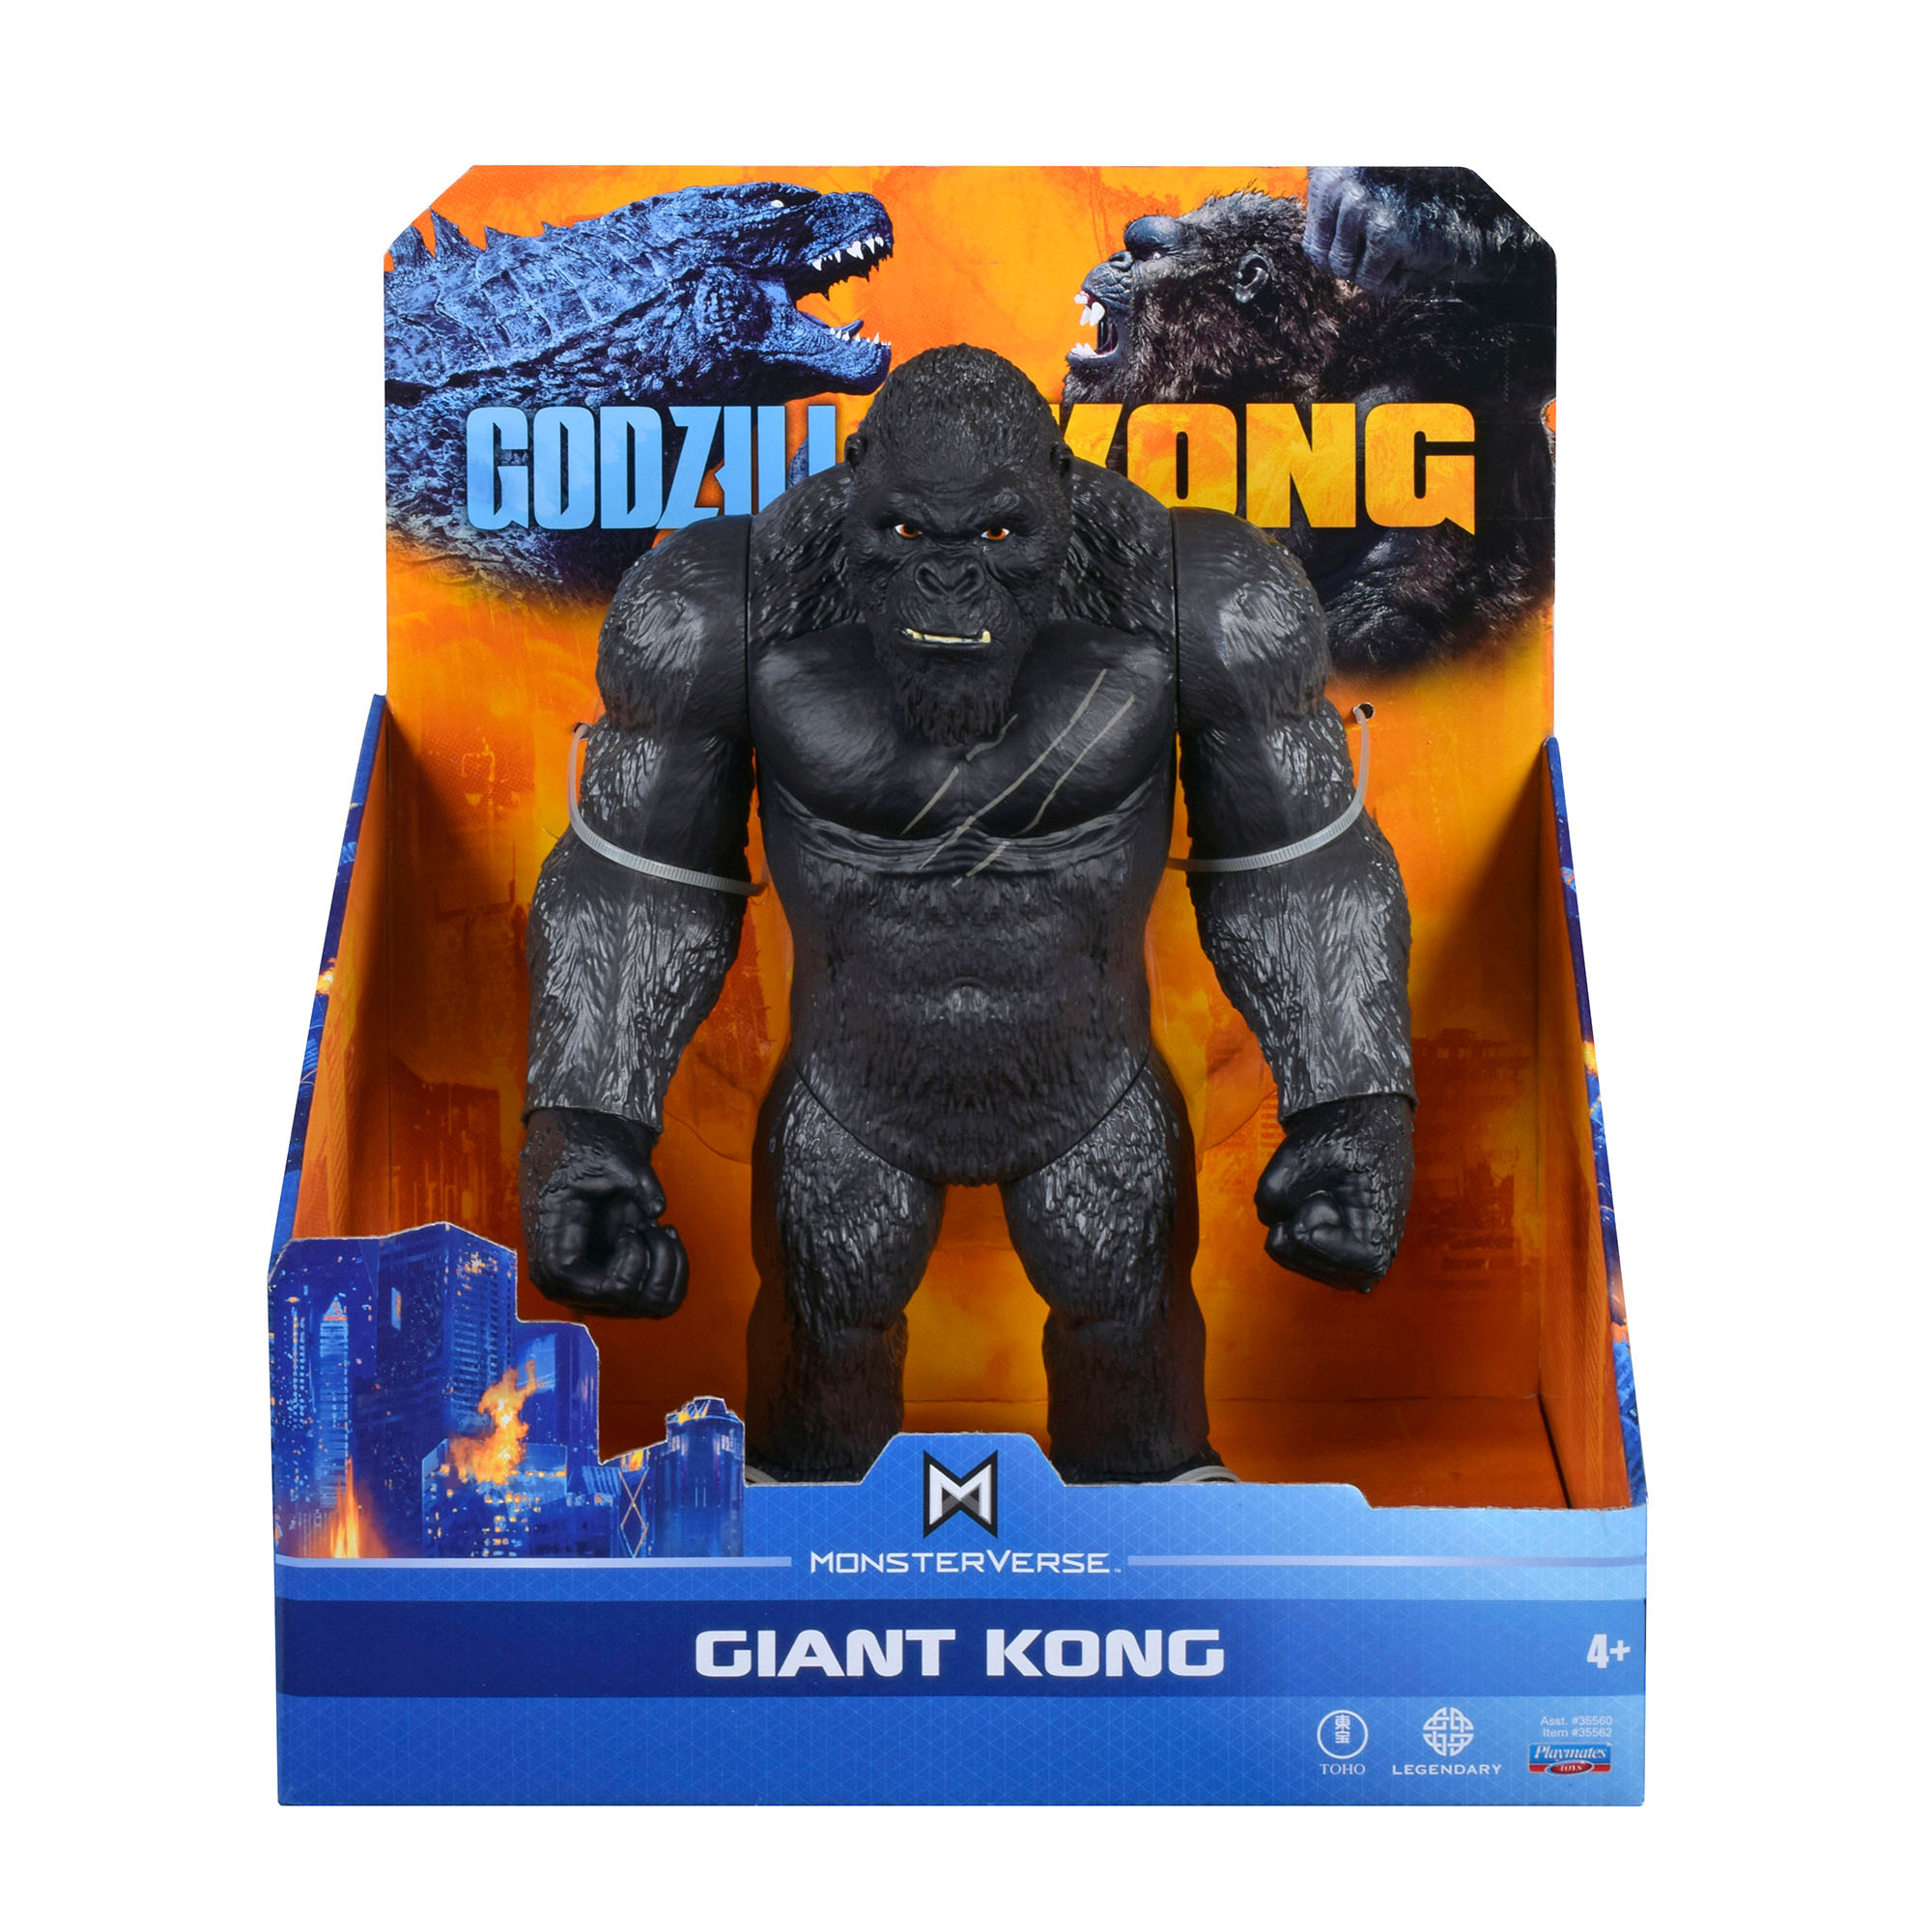 Godzilla vs Kong toys give us our first look at the epic showdown